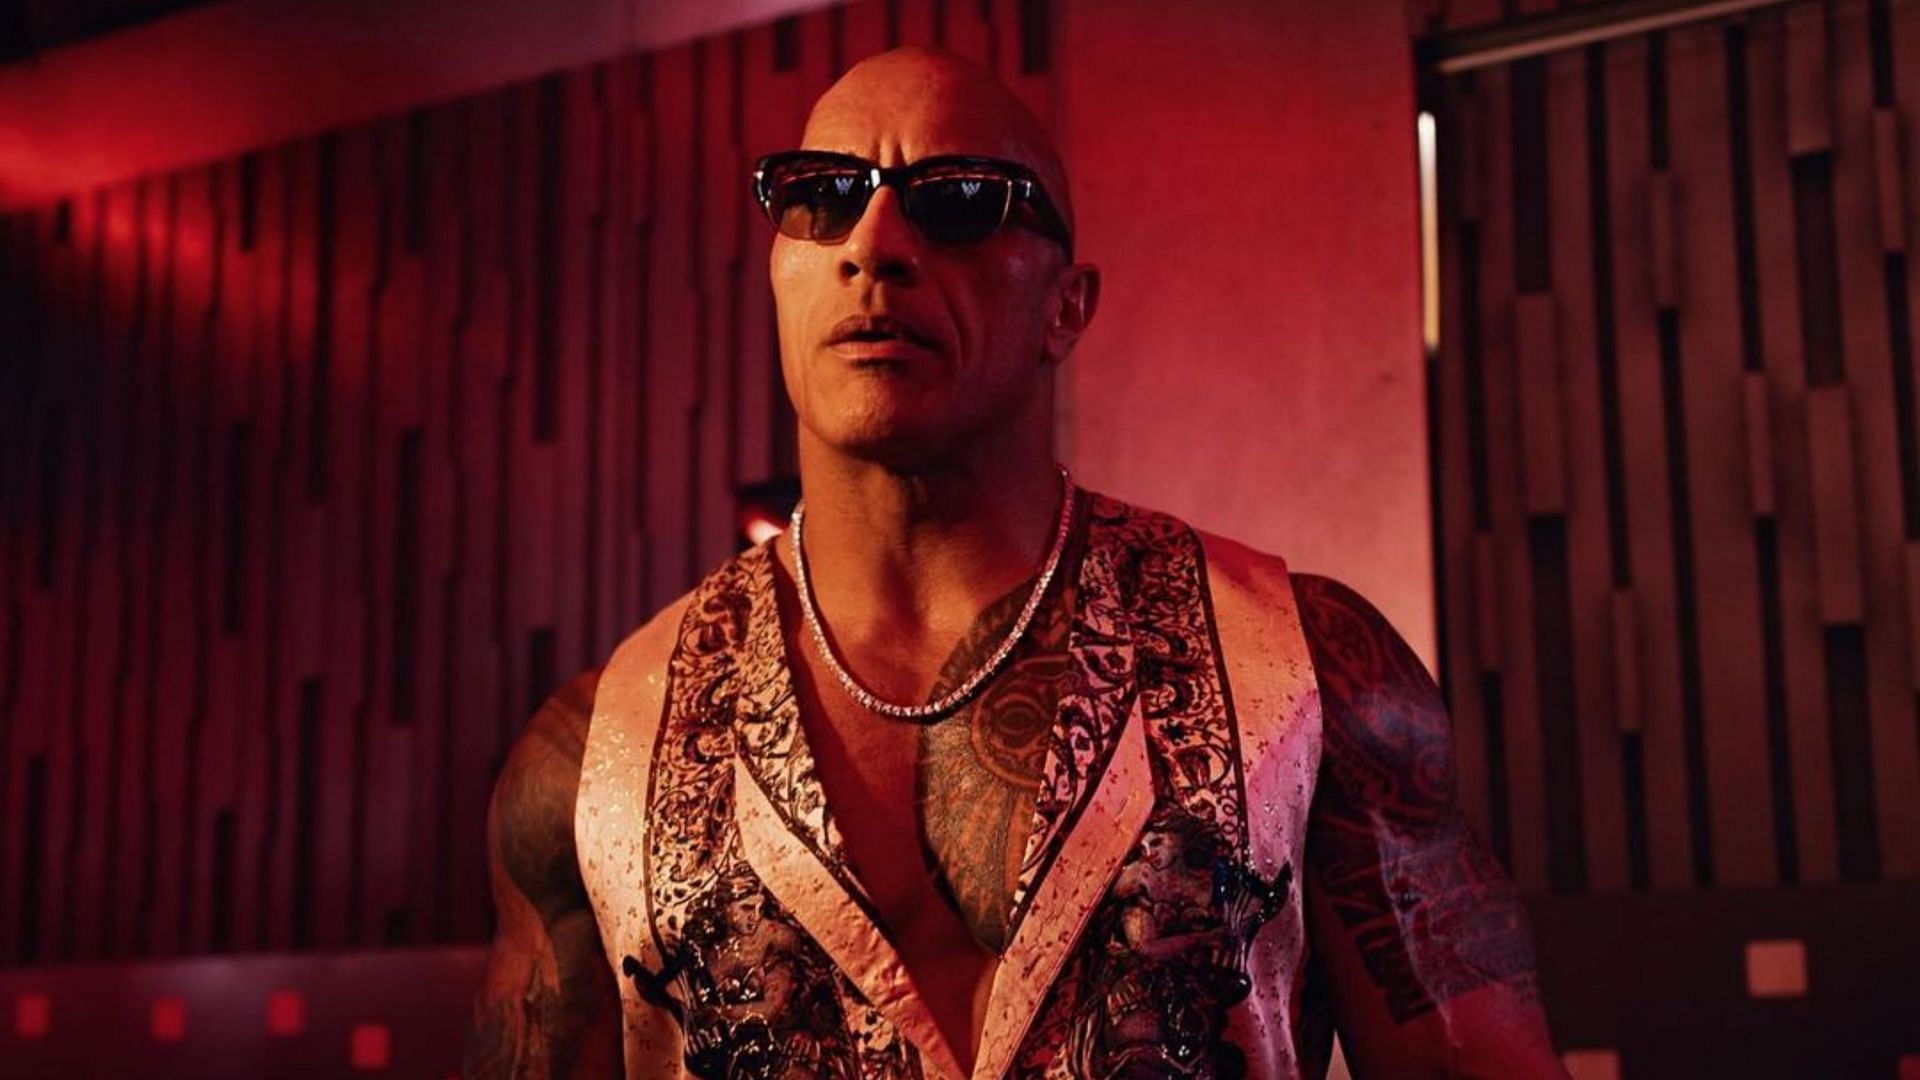 The Rock returned to WWE earlier this year